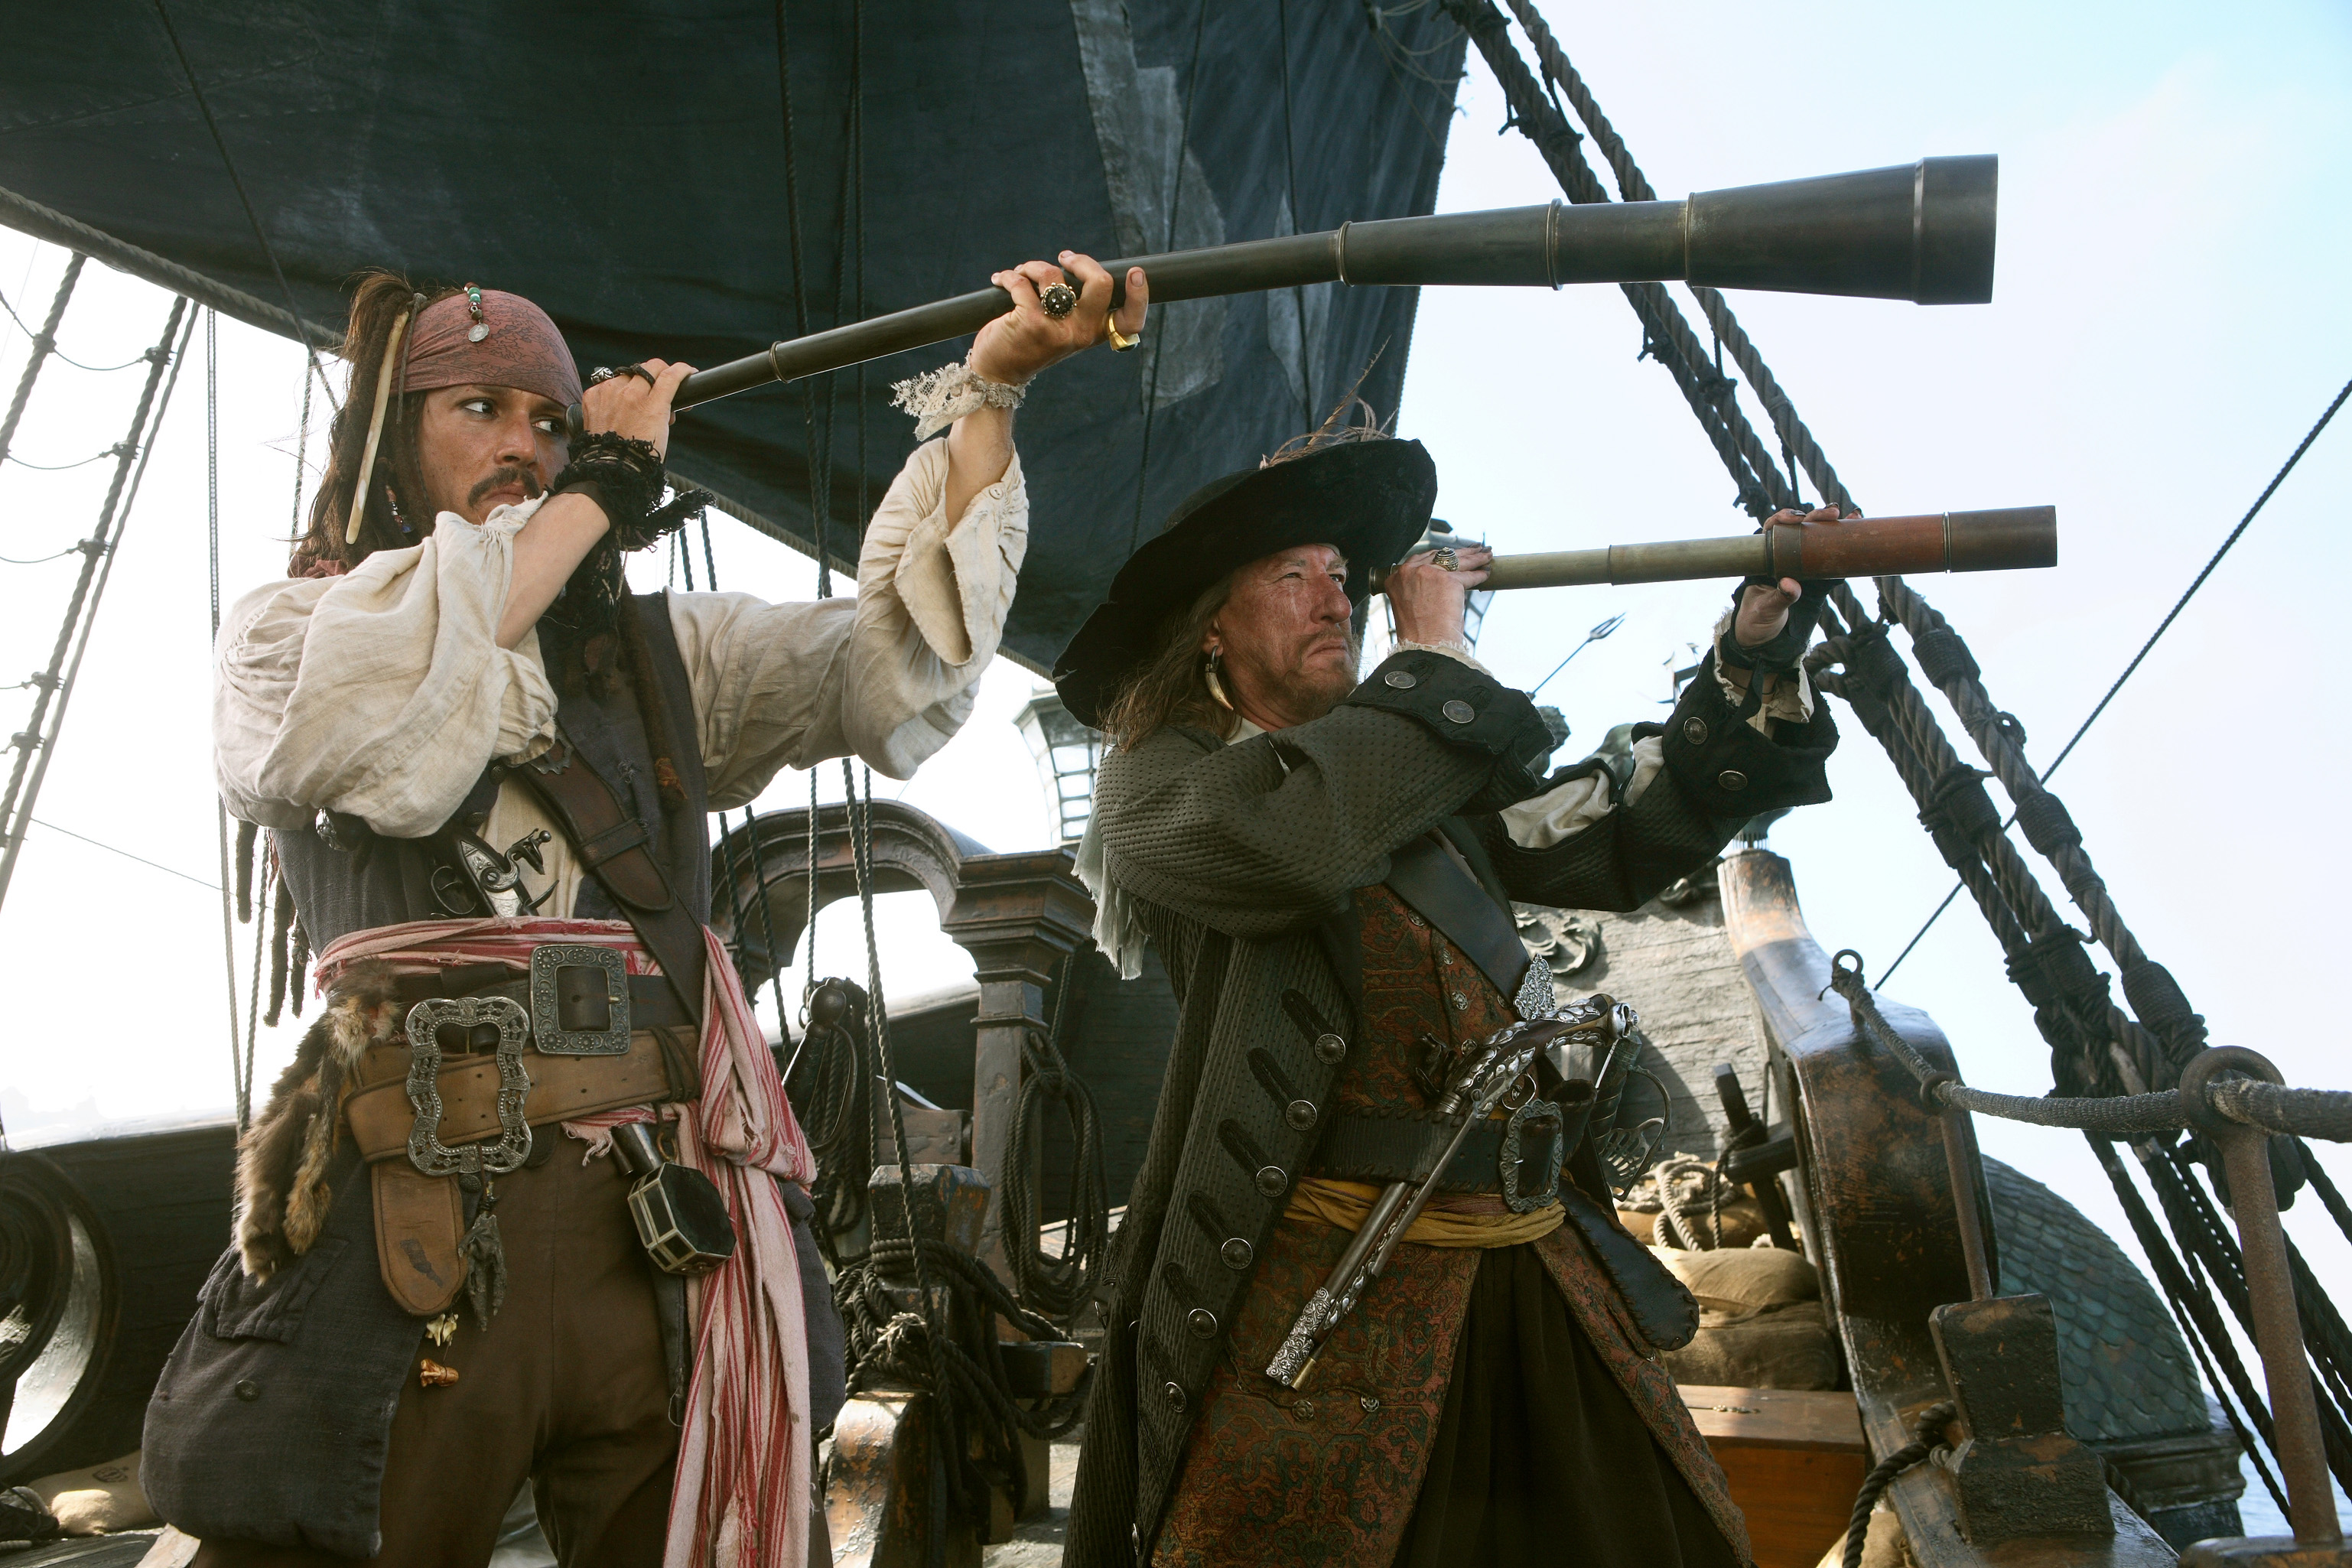 jack sparrow, movie, pirates of the caribbean: at world's end, geoffrey rush, hector barbossa, johnny depp, pirates of the caribbean 8K